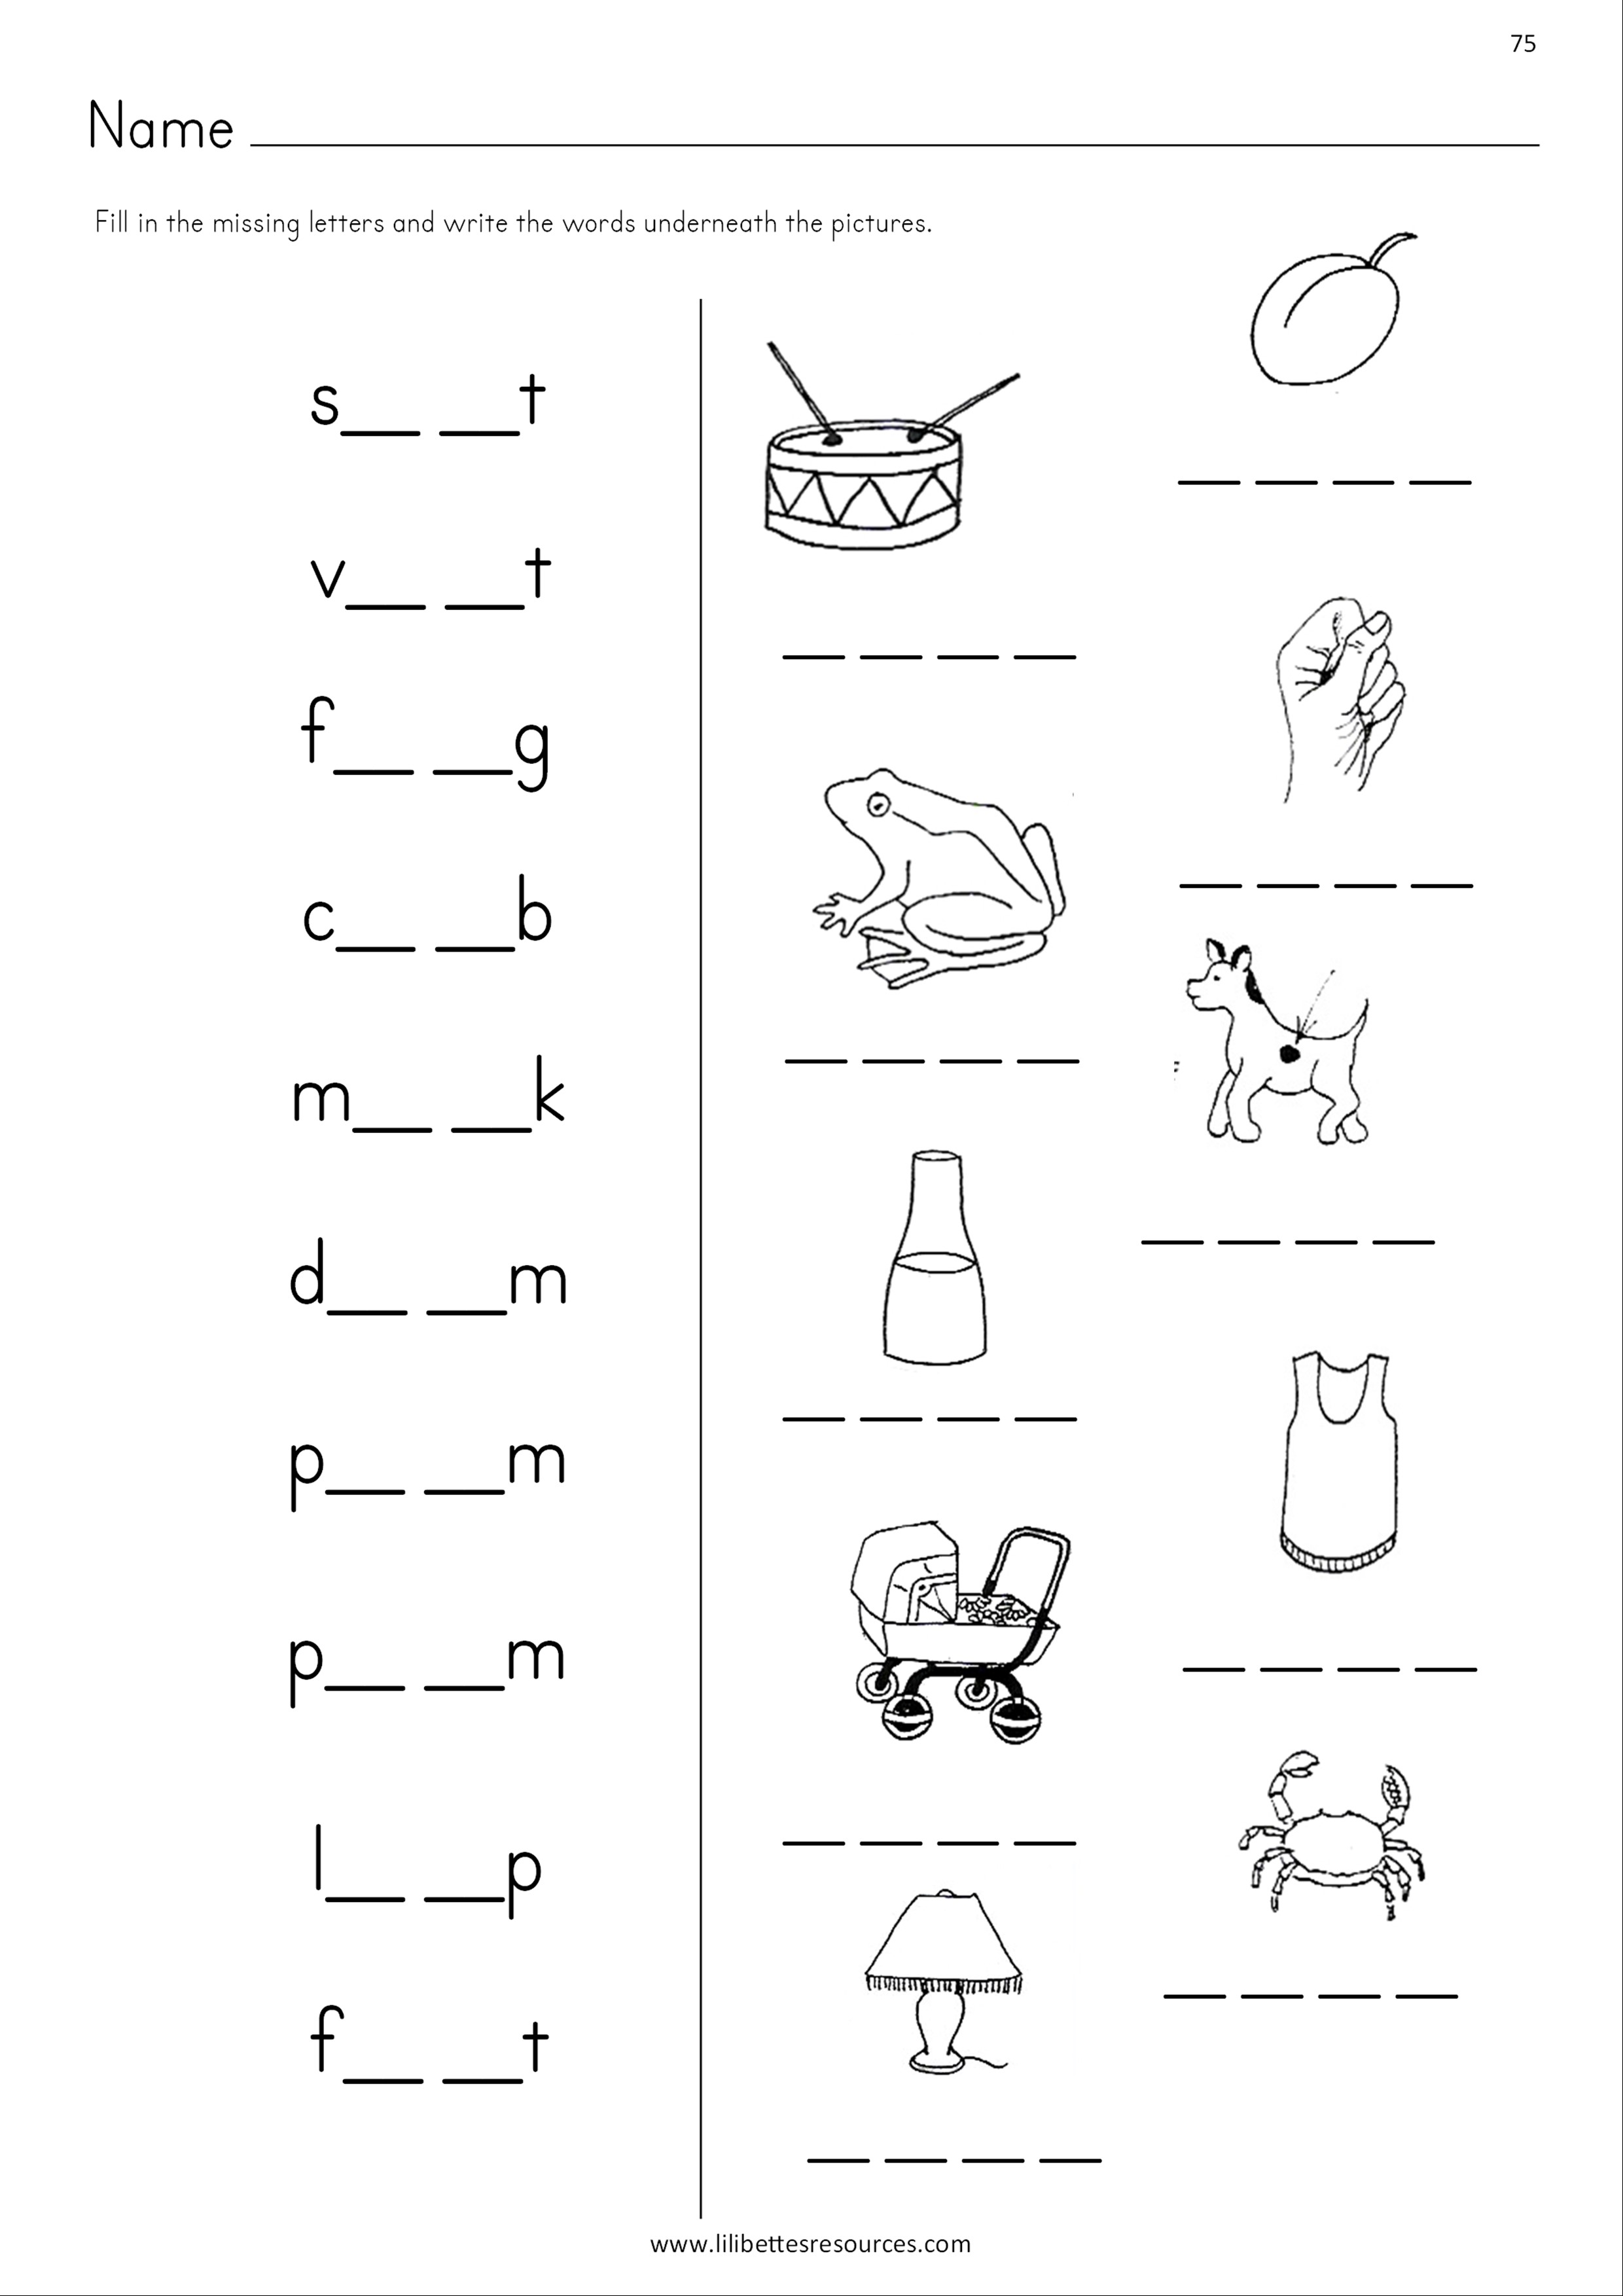 english-worksheets-ccvc-cvcc-words-and-pictures